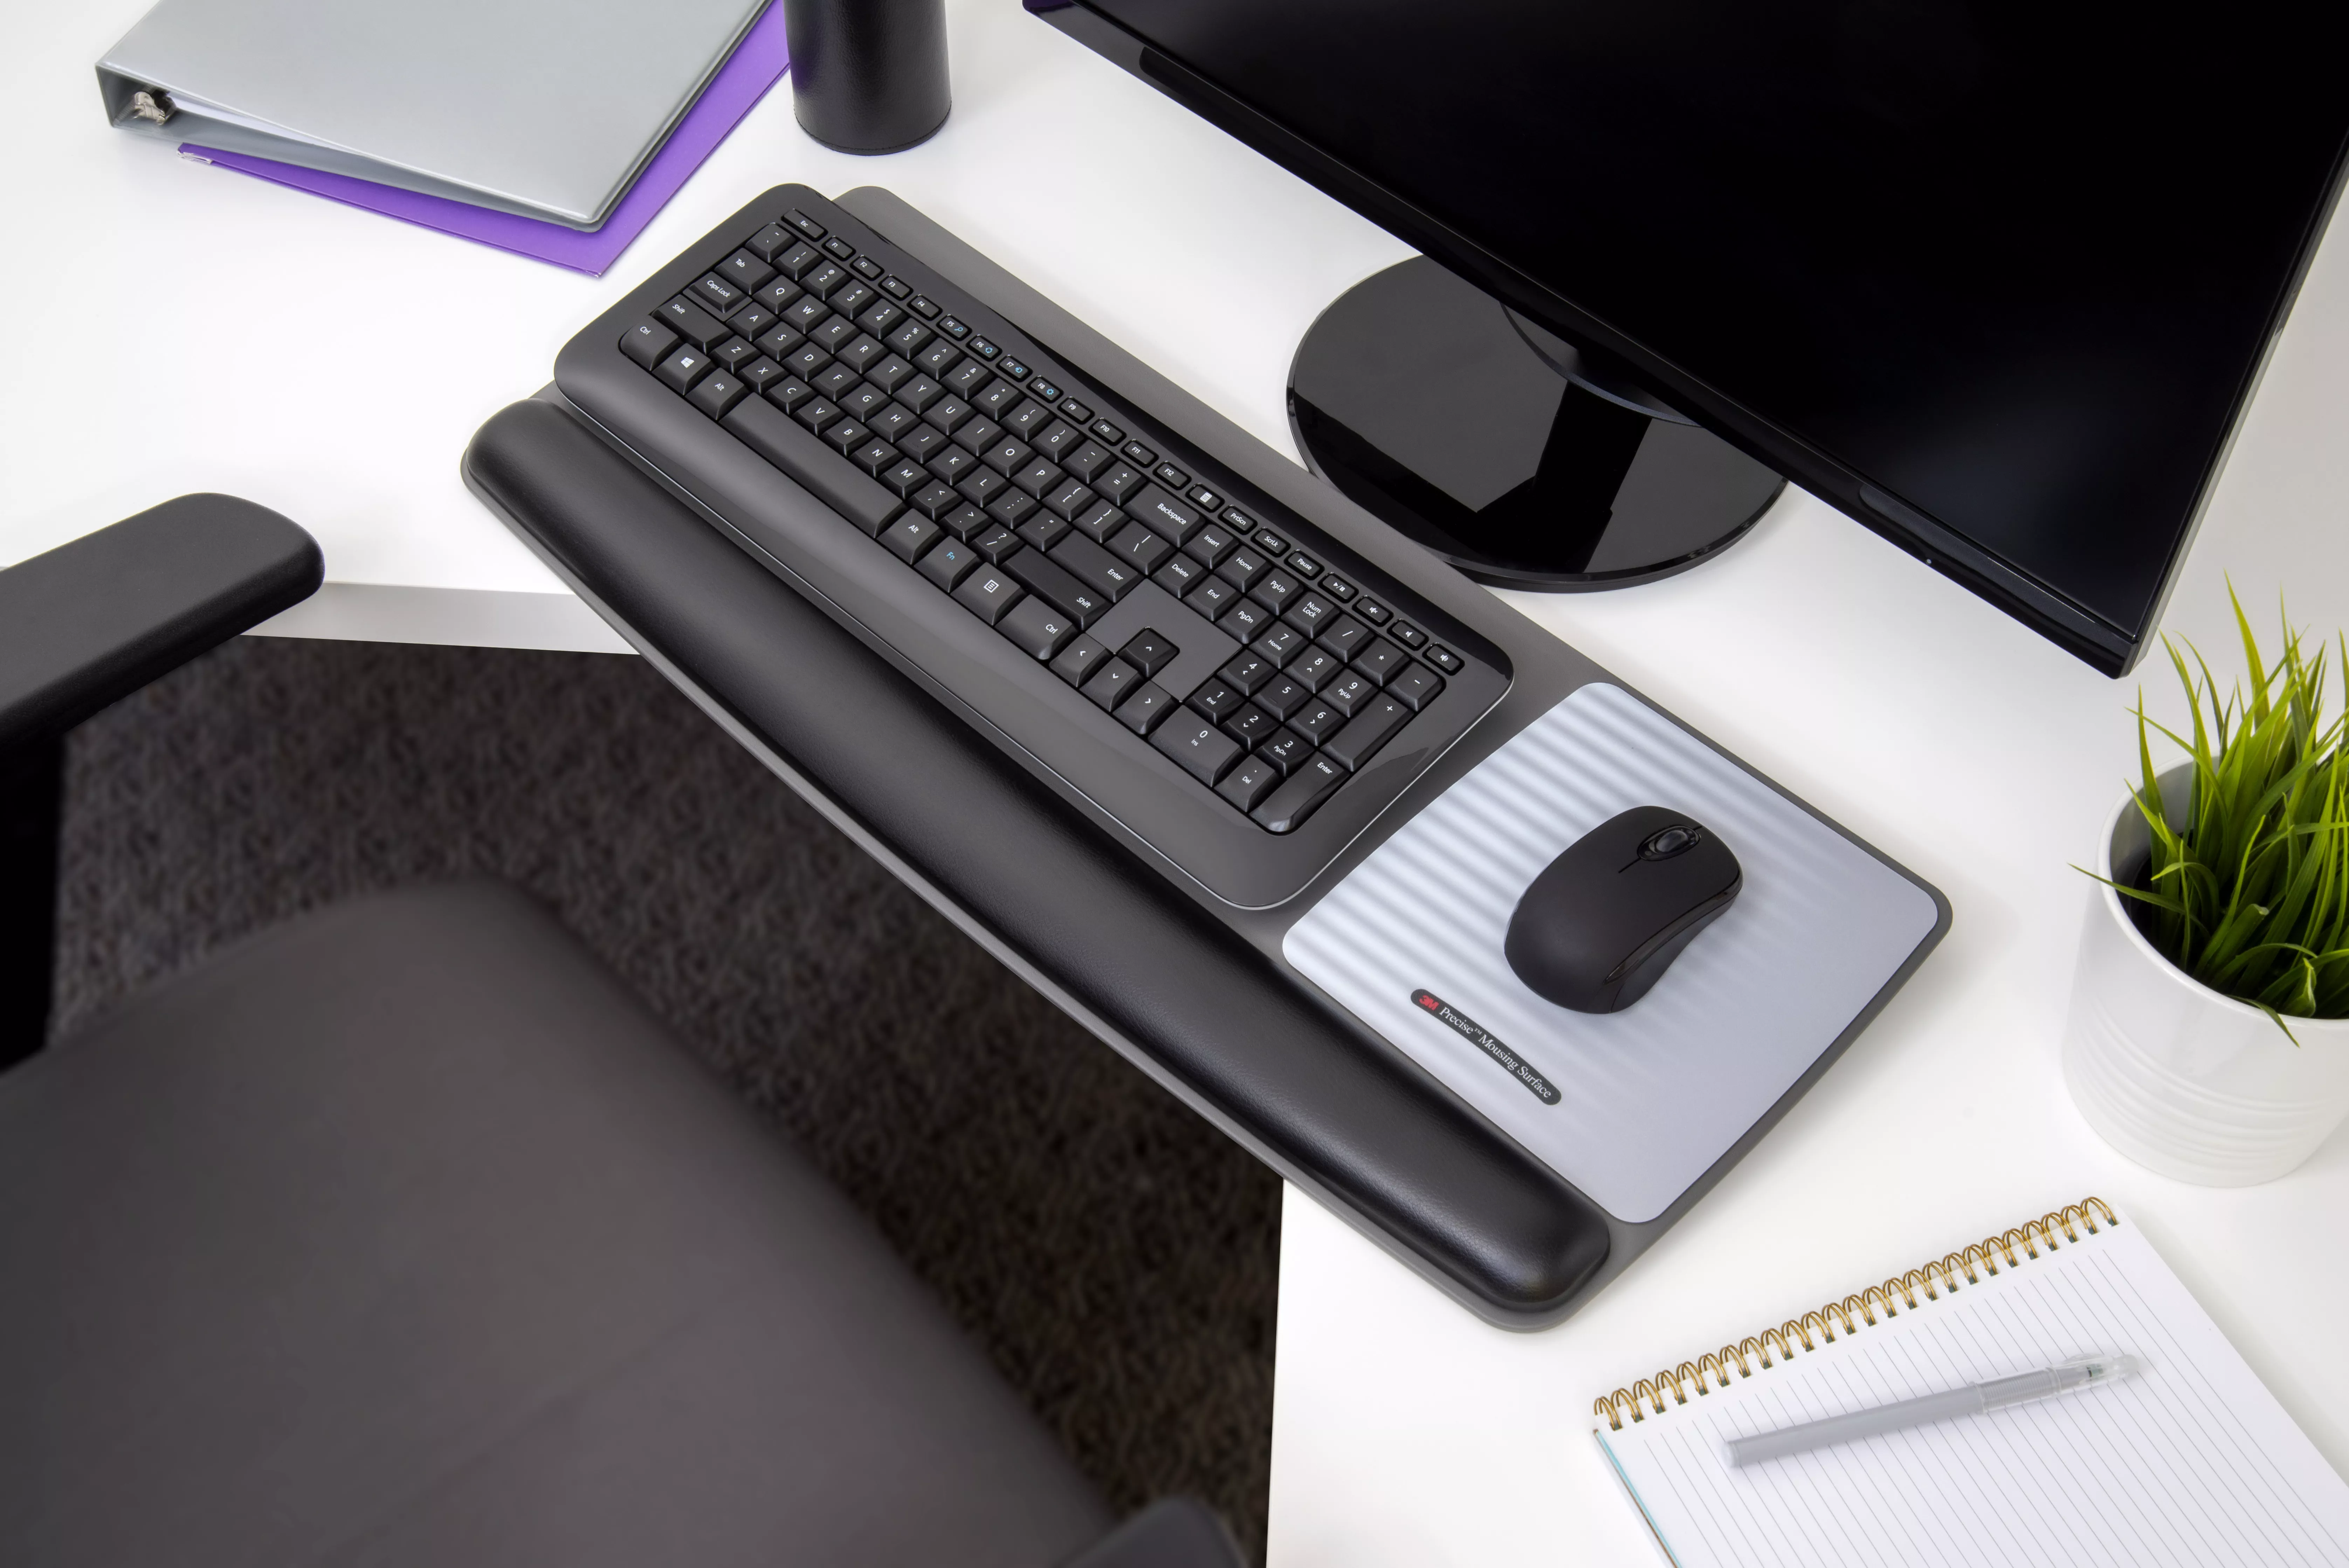 SKU 7100087063 | 3M™ Gel Wristrest Platform For Keyboard and Mouse With Precise™ Battery
Saving Mouse Pad